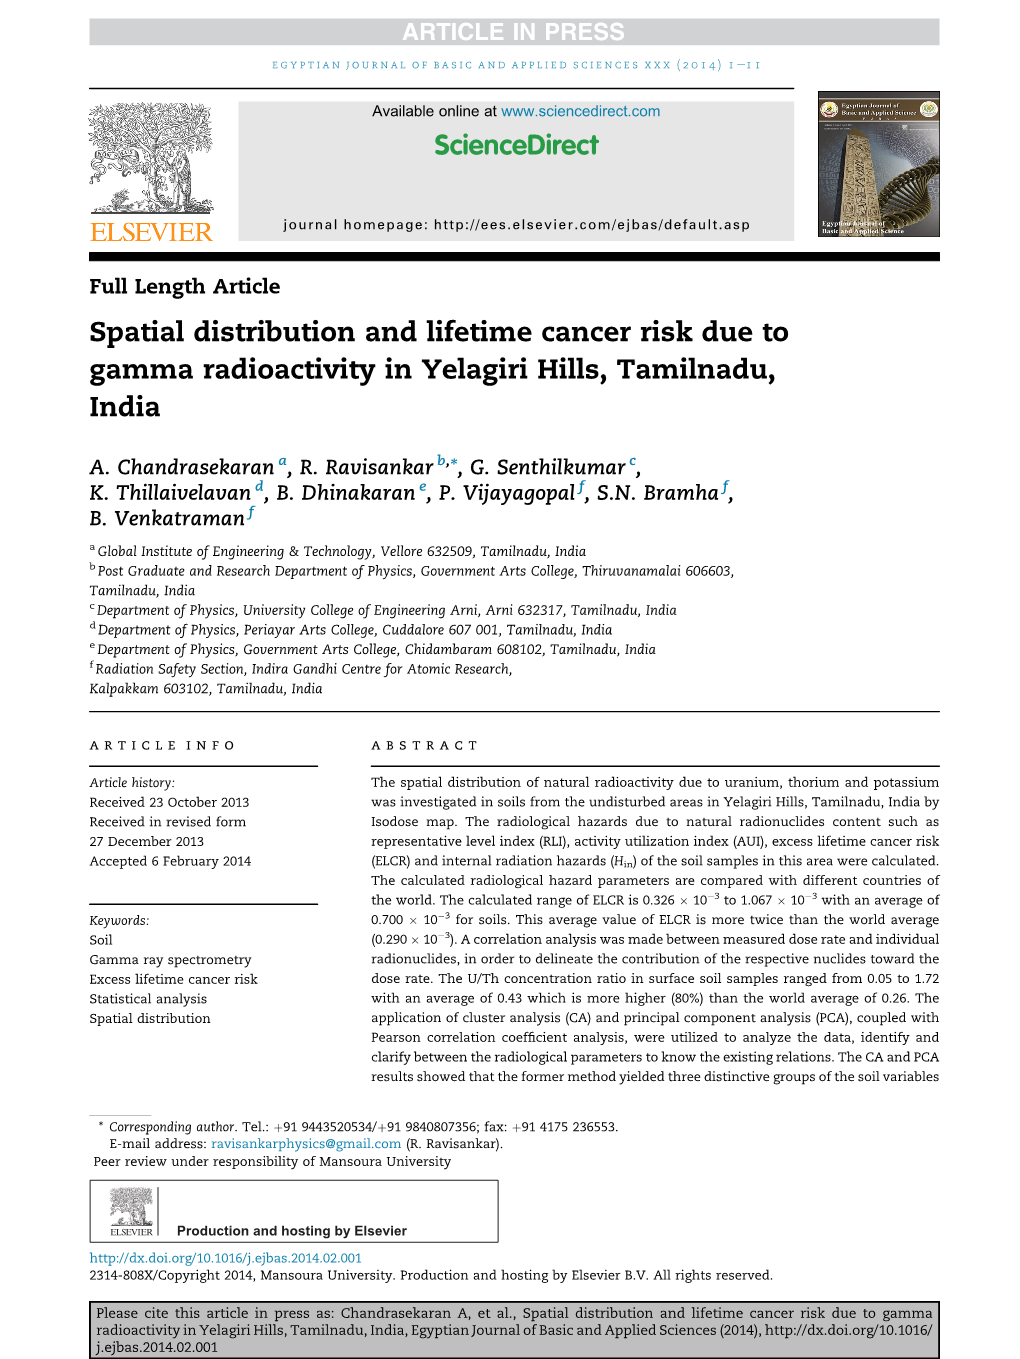 Spatial Distribution and Lifetime Cancer Risk Due to Gamma Radioactivity in Yelagiri Hills, Tamilnadu, India